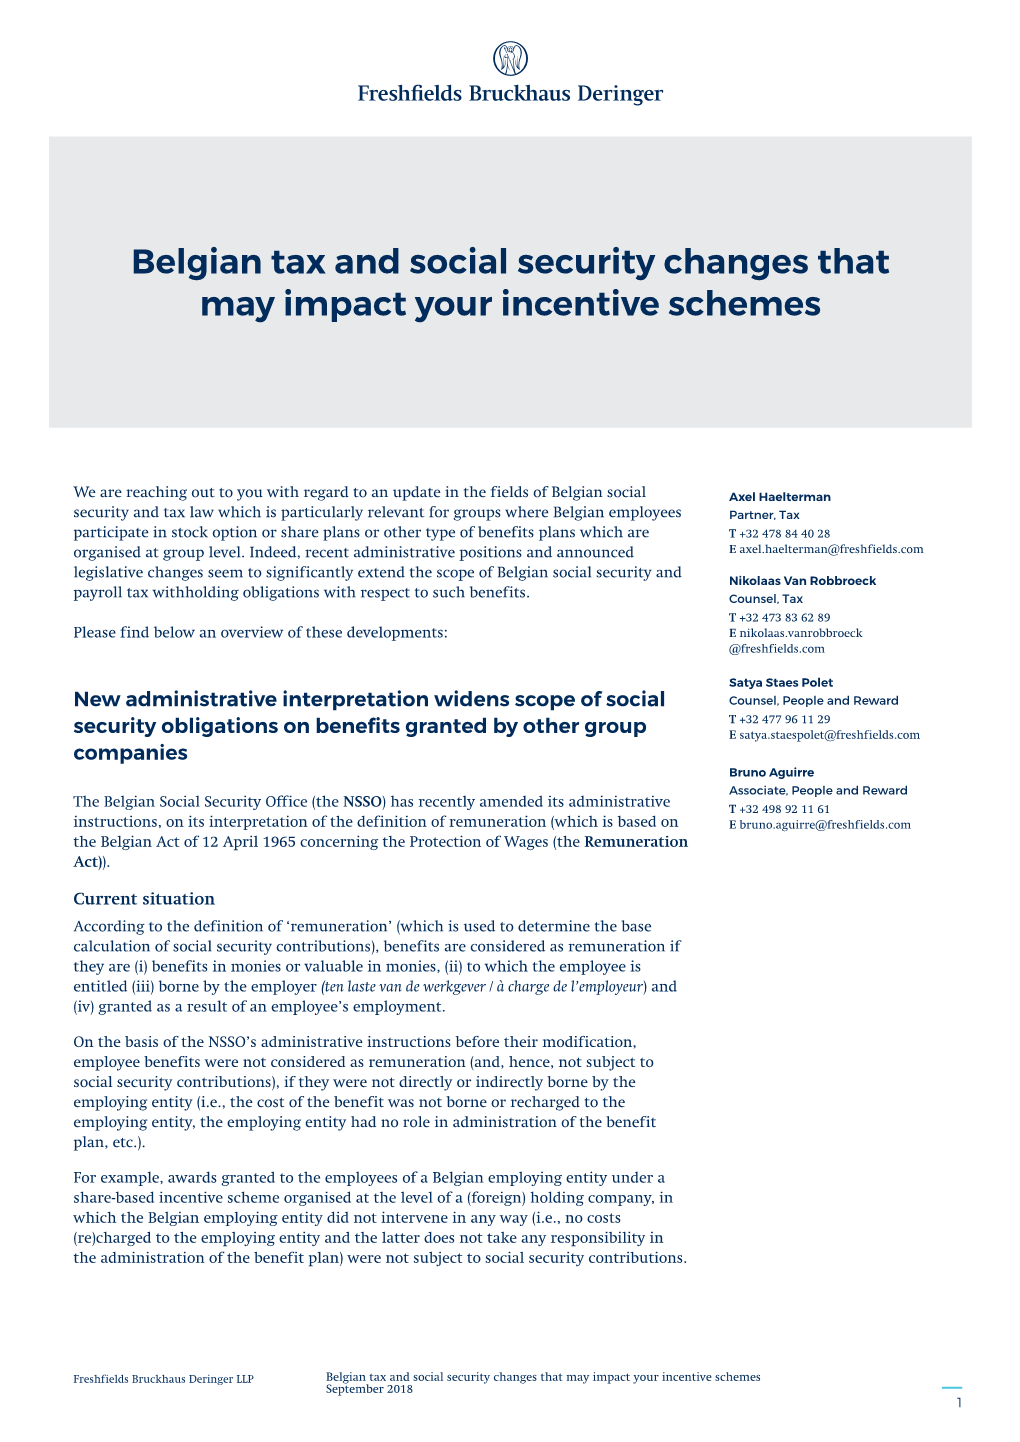 Belgian Tax and Social Security Changes That May Impact Your Incentive Schemes